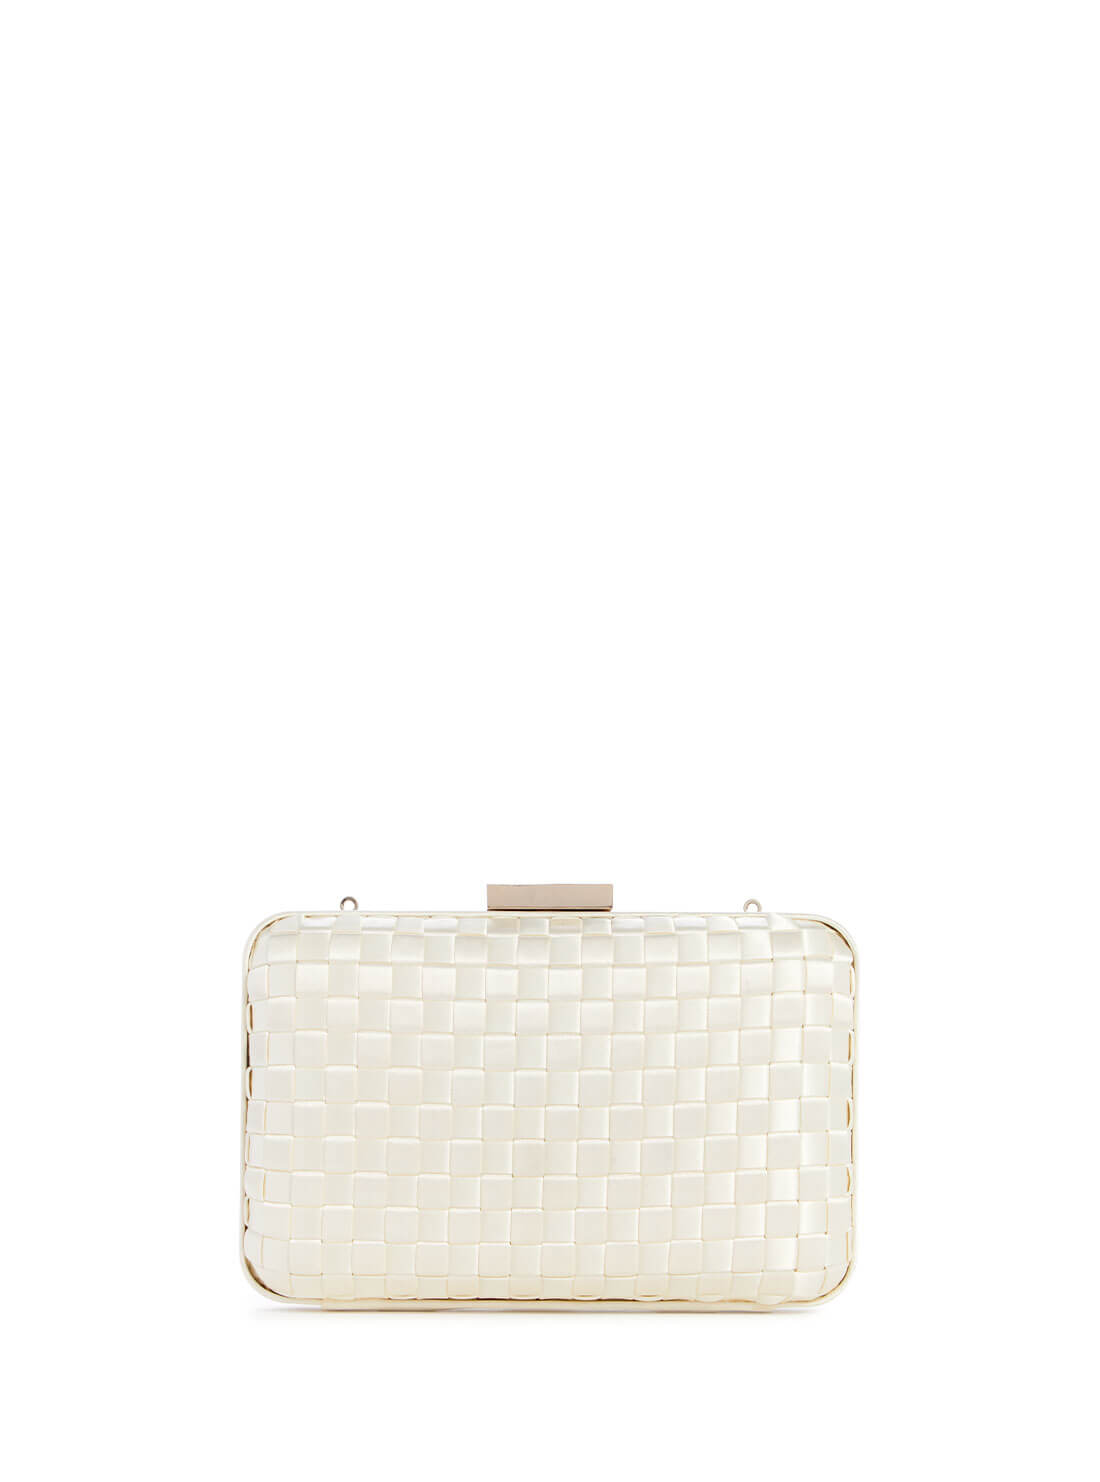 GUESS White Twiller Minaudiere Clutch Bag back view